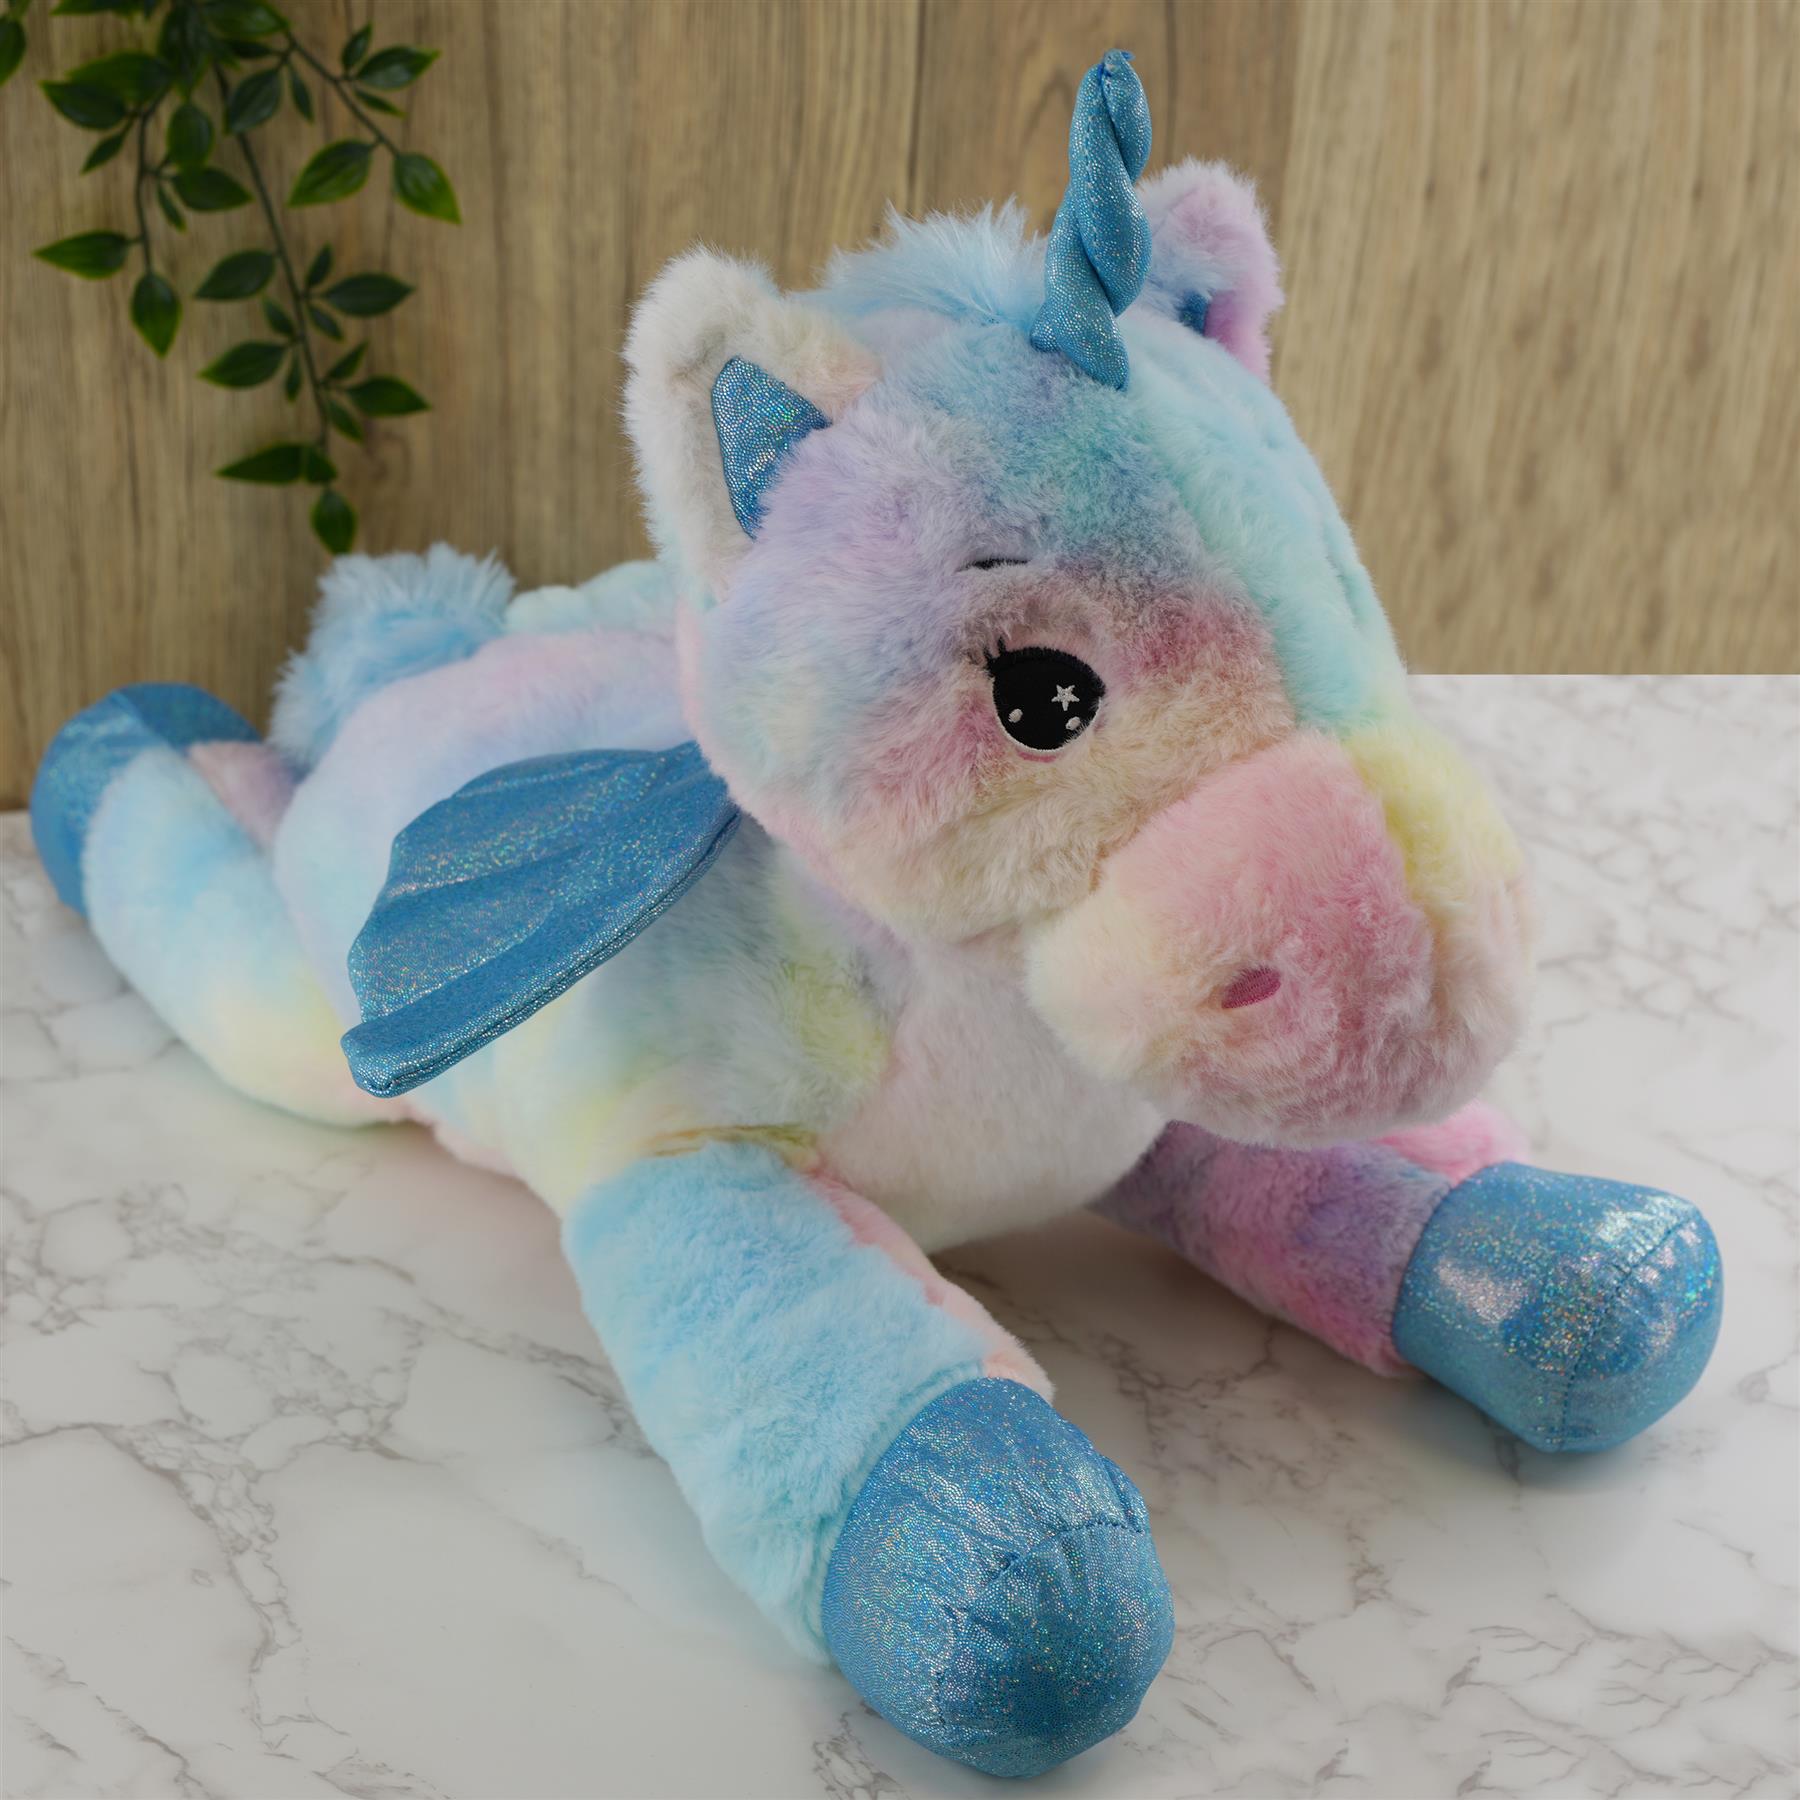 The Magic Toy Shop Plush Toy Unicorn with Sparkling Wings - Soft Toy